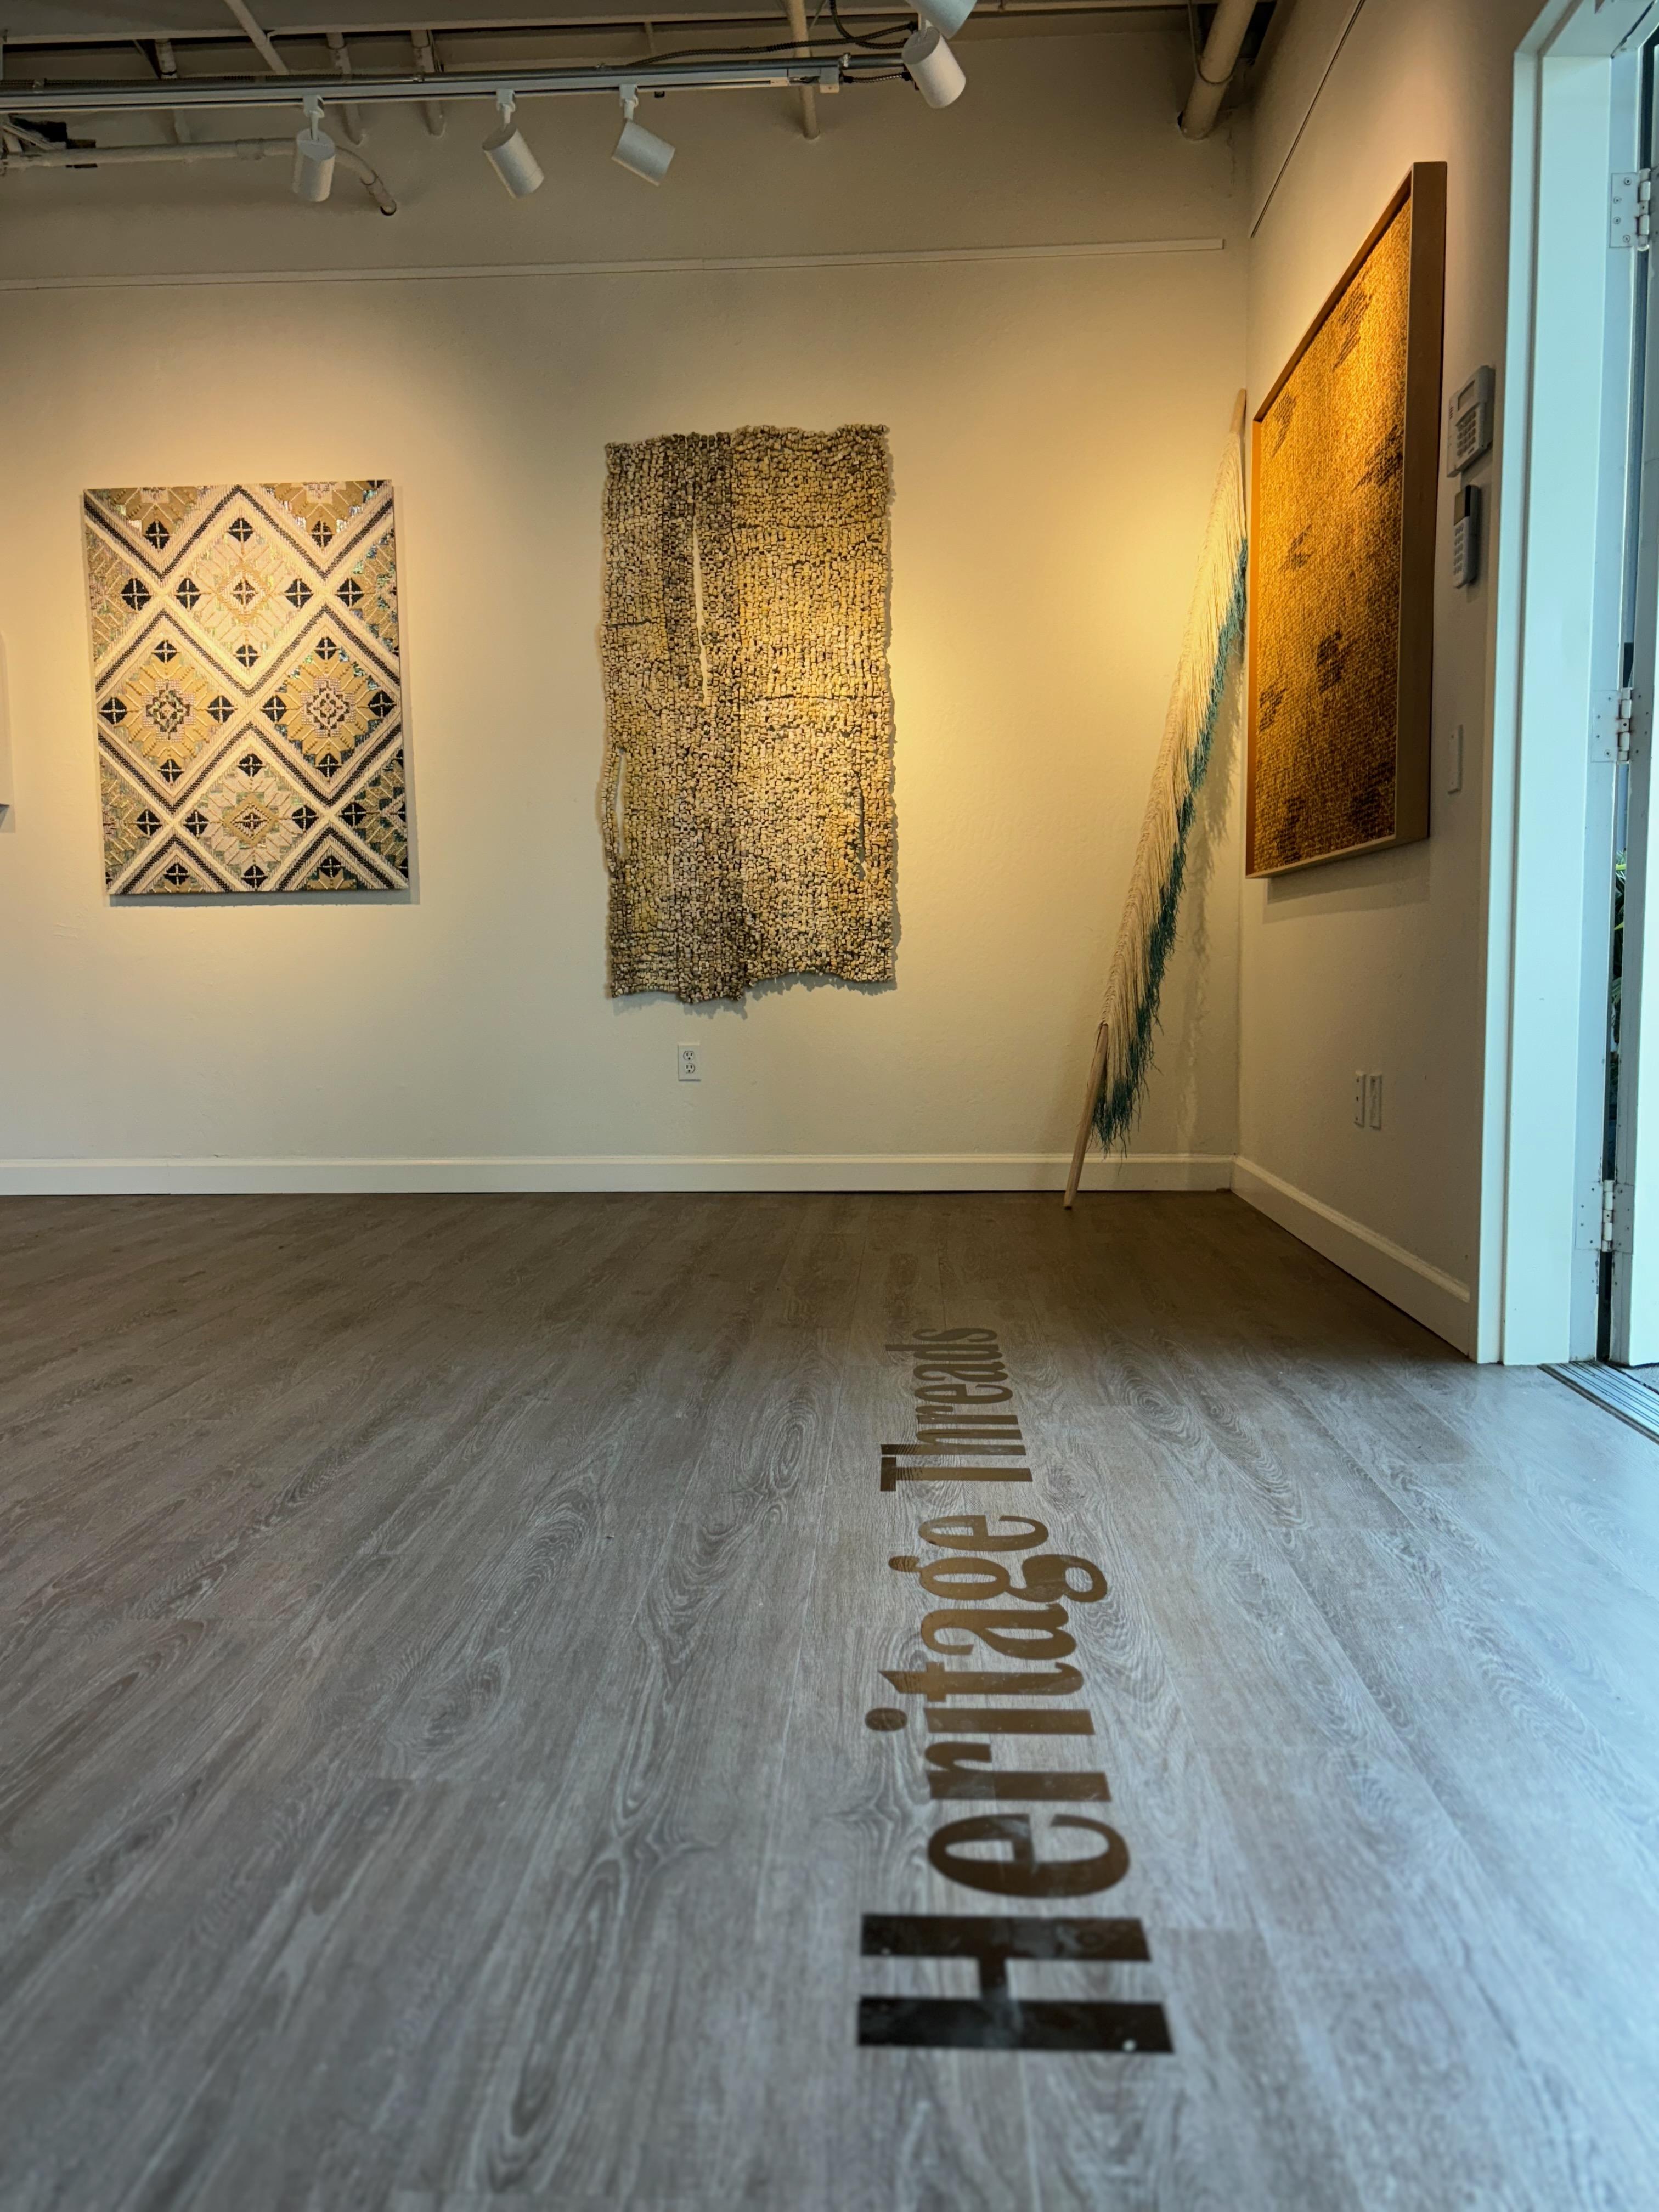 Through a meditative practice, Tan glues these various materials on wood panels in intricate patterns directly inspired by traditional Filipino tribal tattoos, regional textiles and the fabrics handwoven by her grandmother, a seamstress and